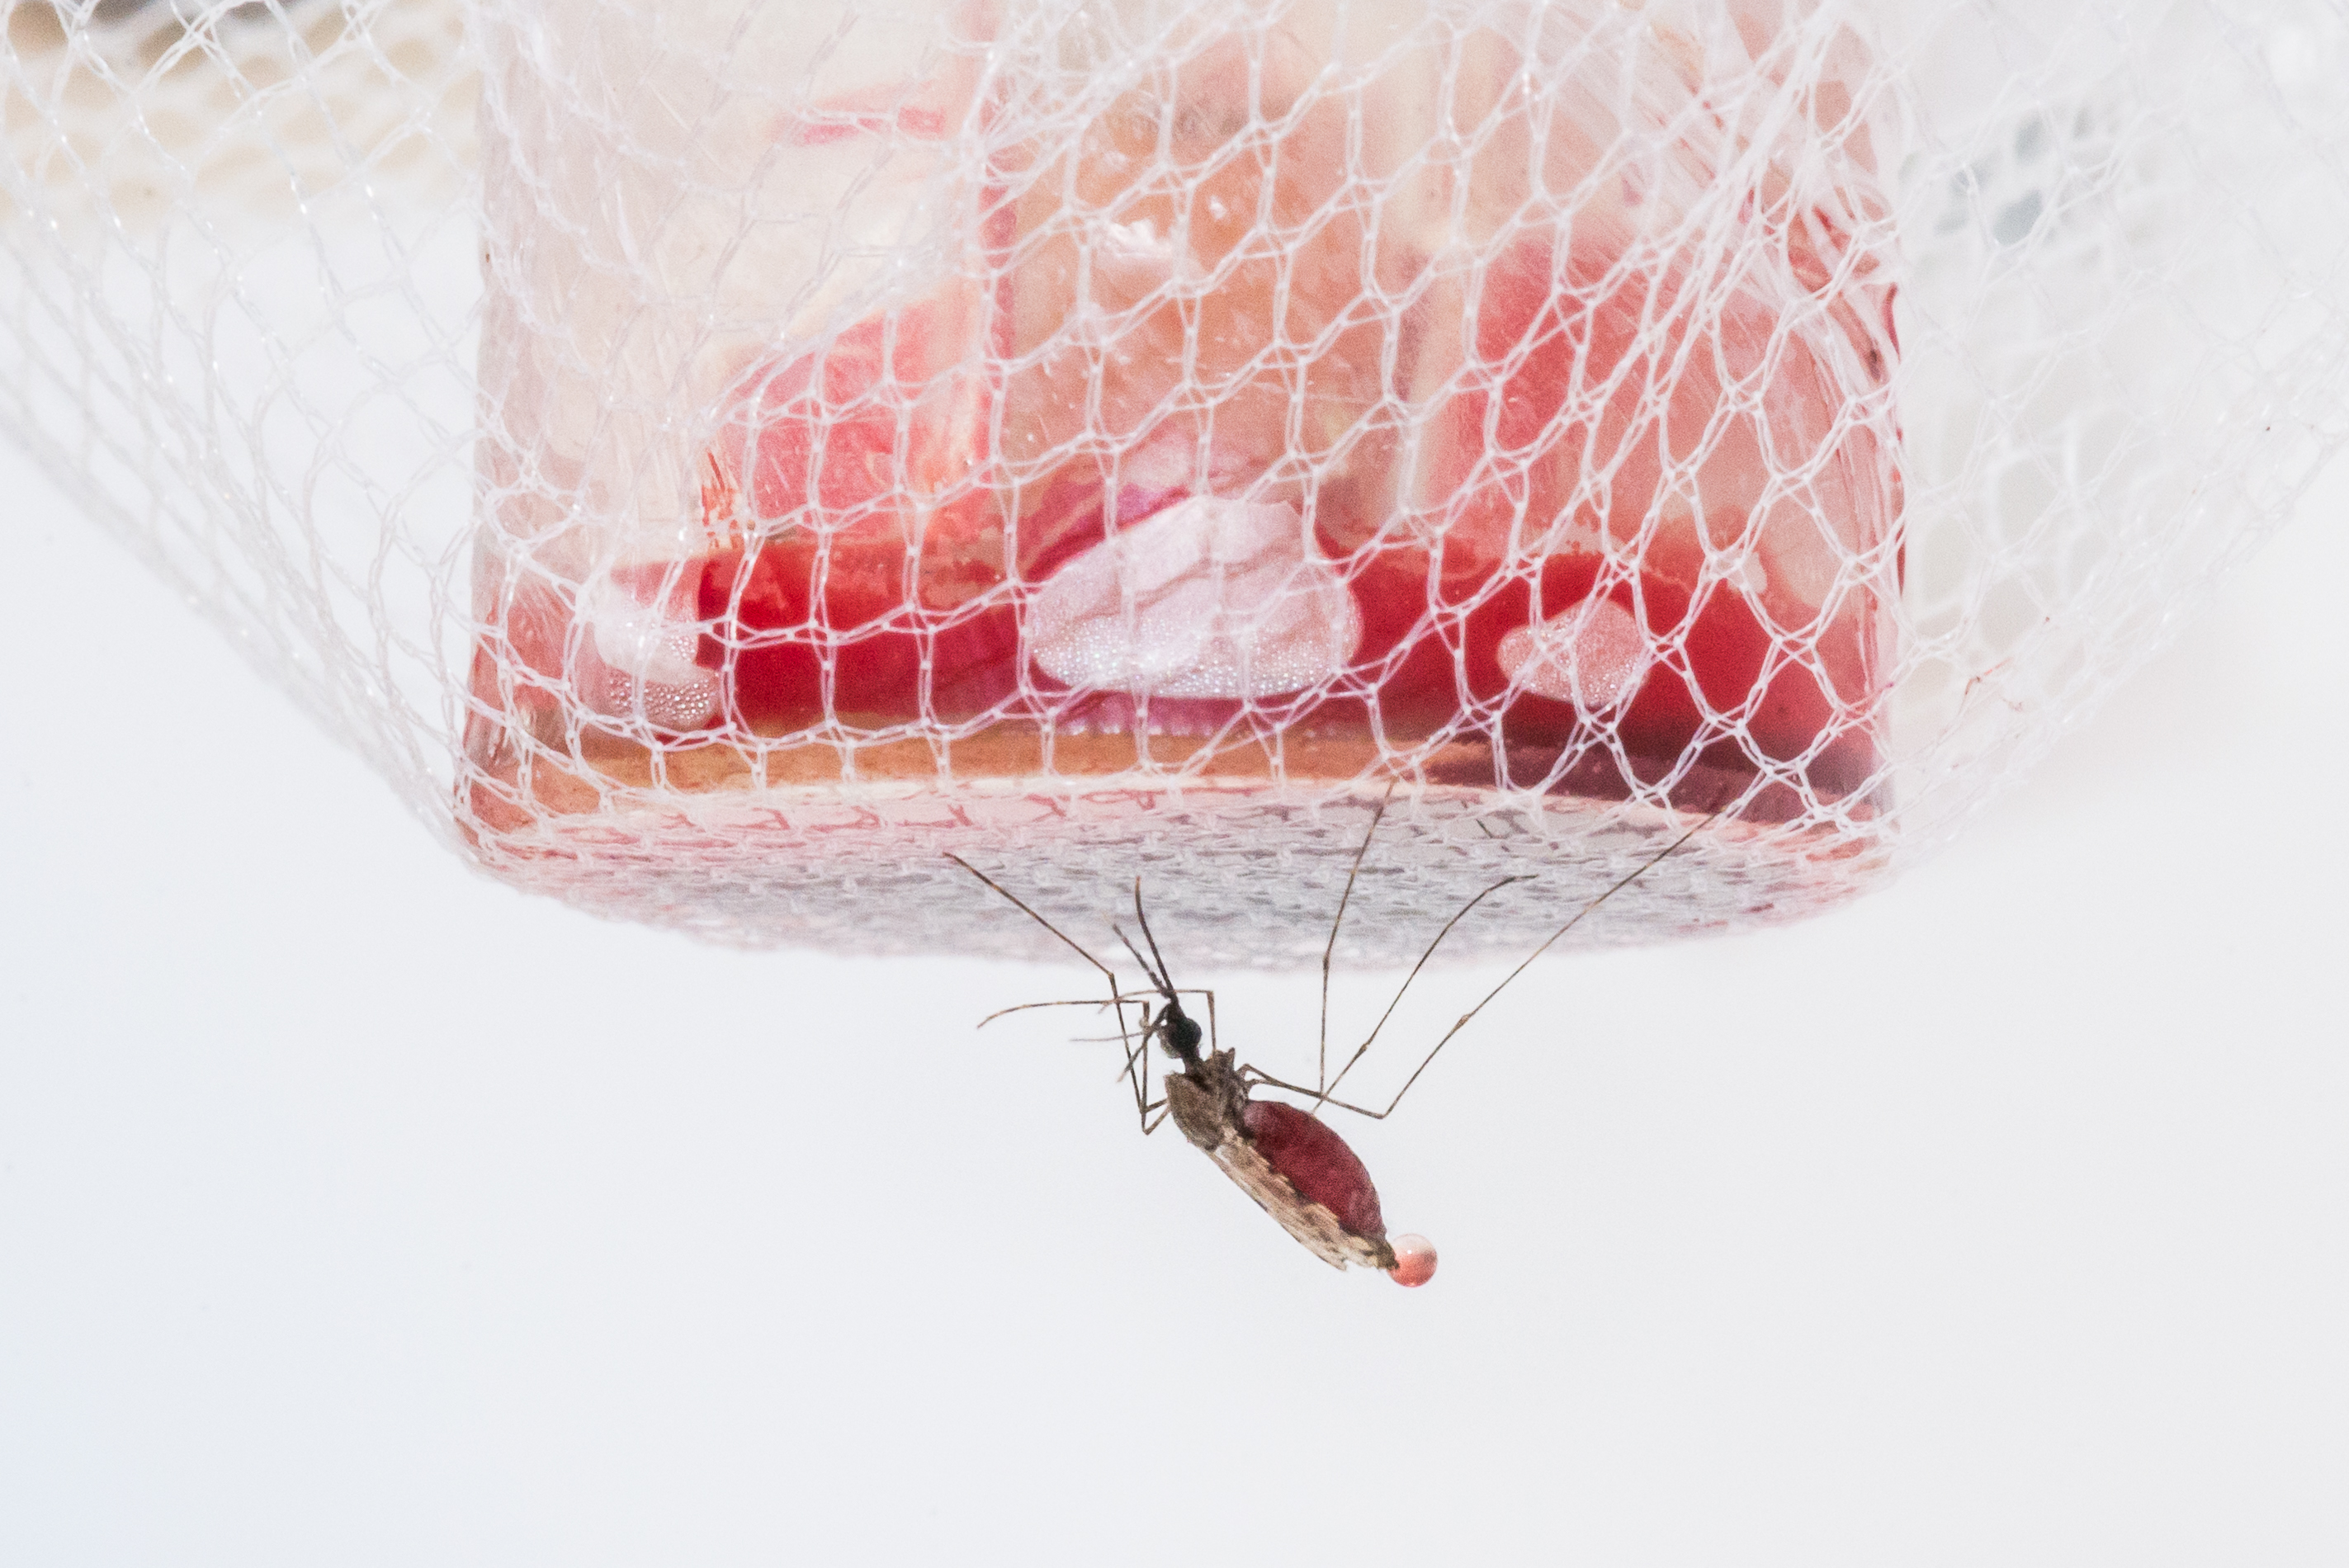 An Anopheles mosquito ingests blood from a malaria-infected study participant. Credit: Fabien Beilhe, Radboudumc